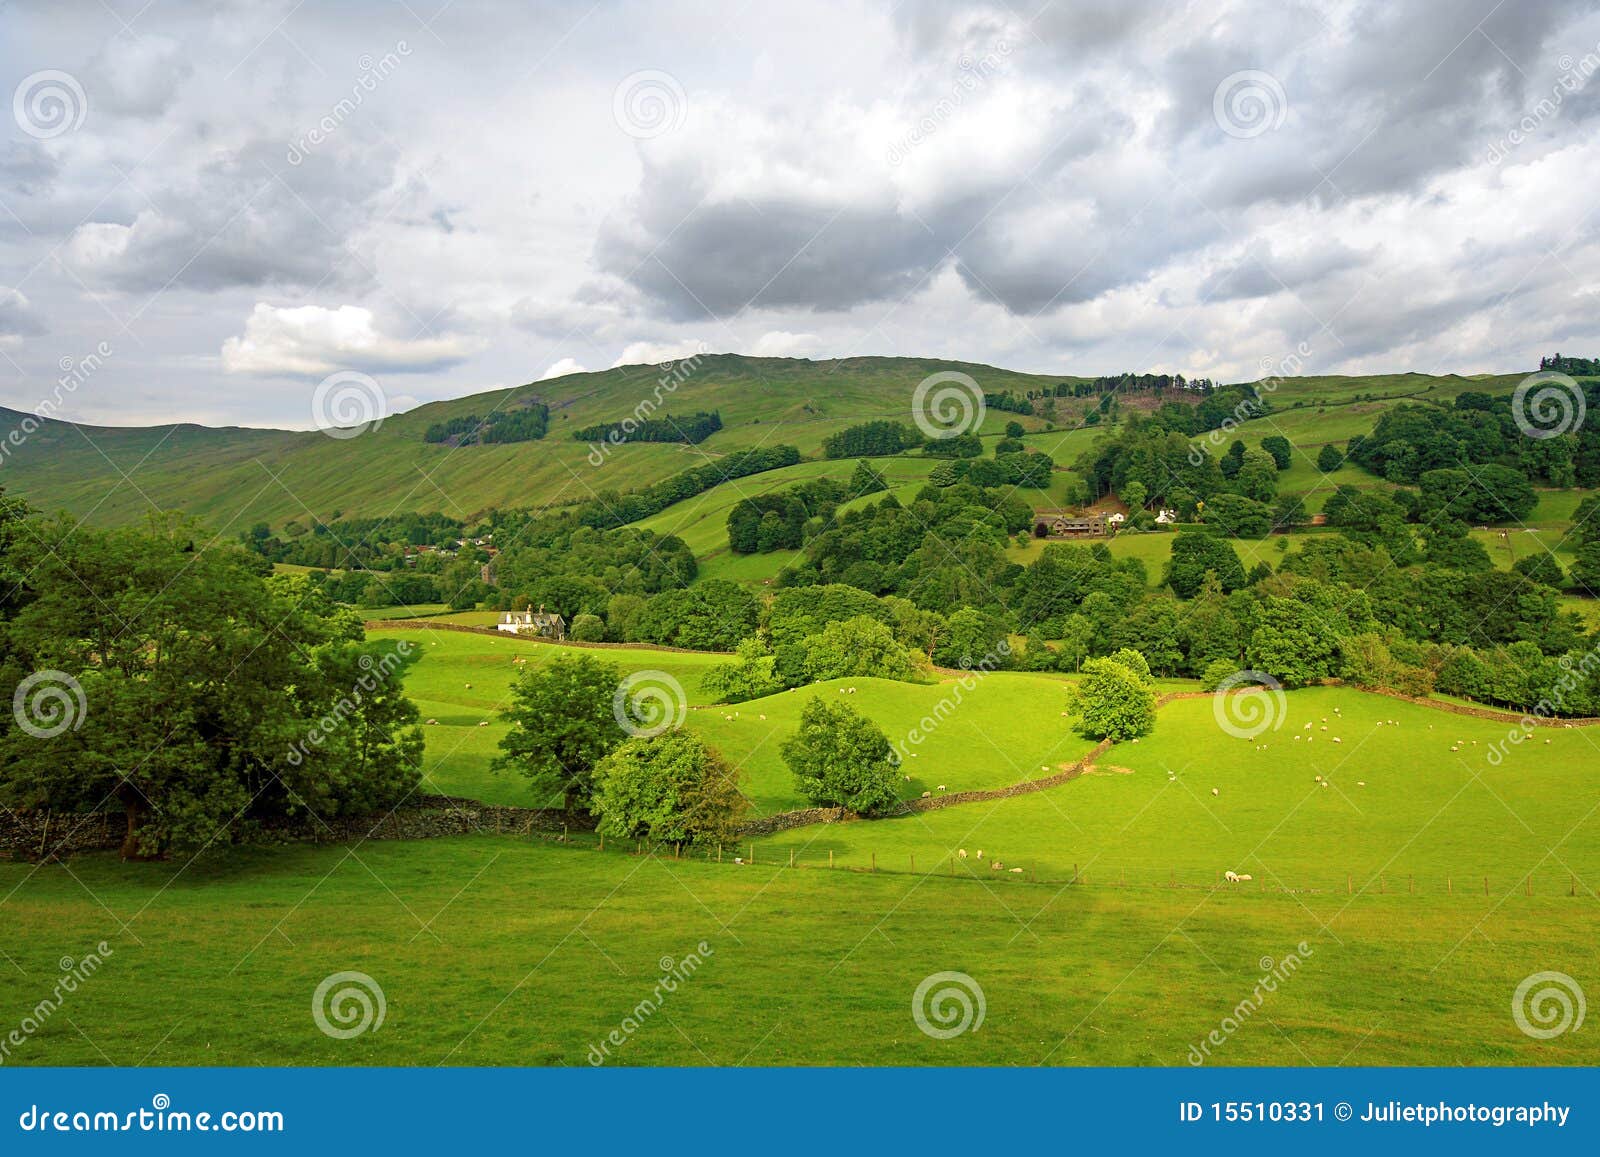 Landscape with hills and stone fences, Lake District.